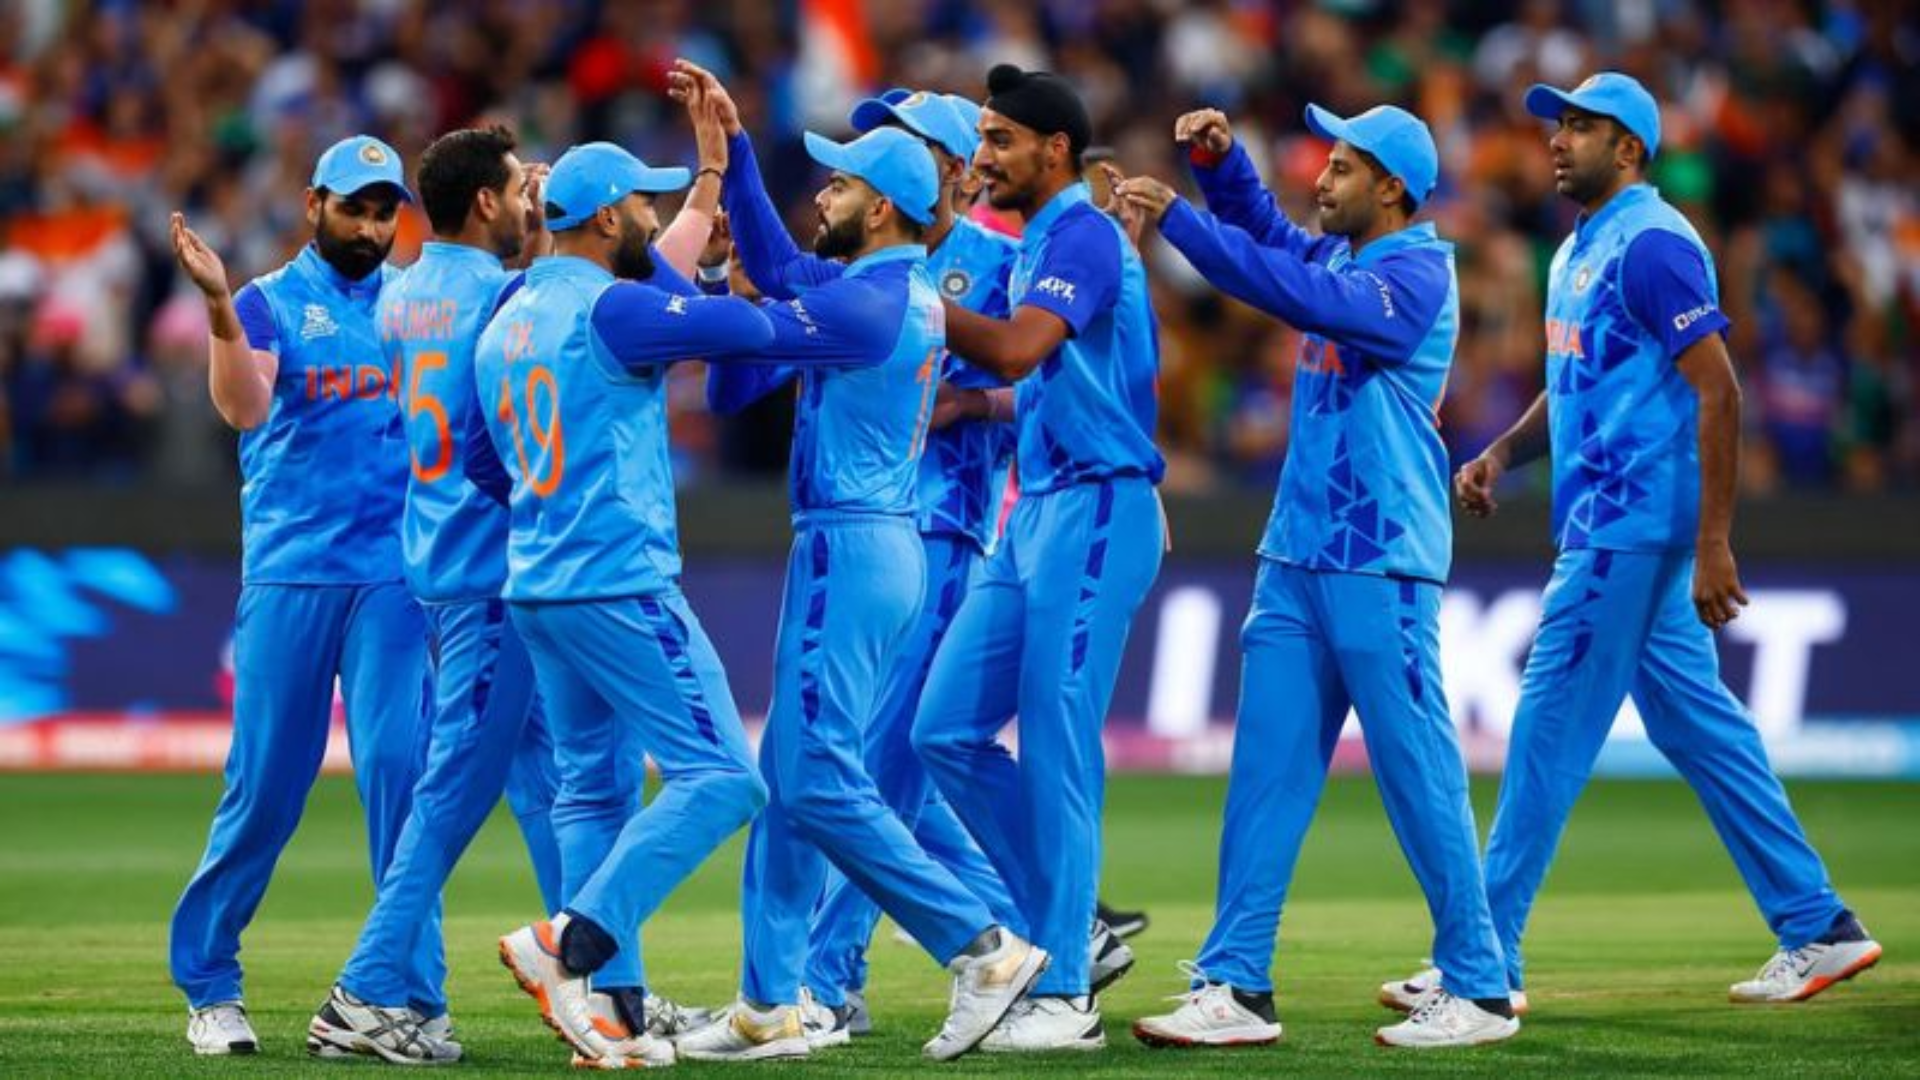 Predictions Swirl as BCCI Nears Announcement of India’s T20 World Cup Squad